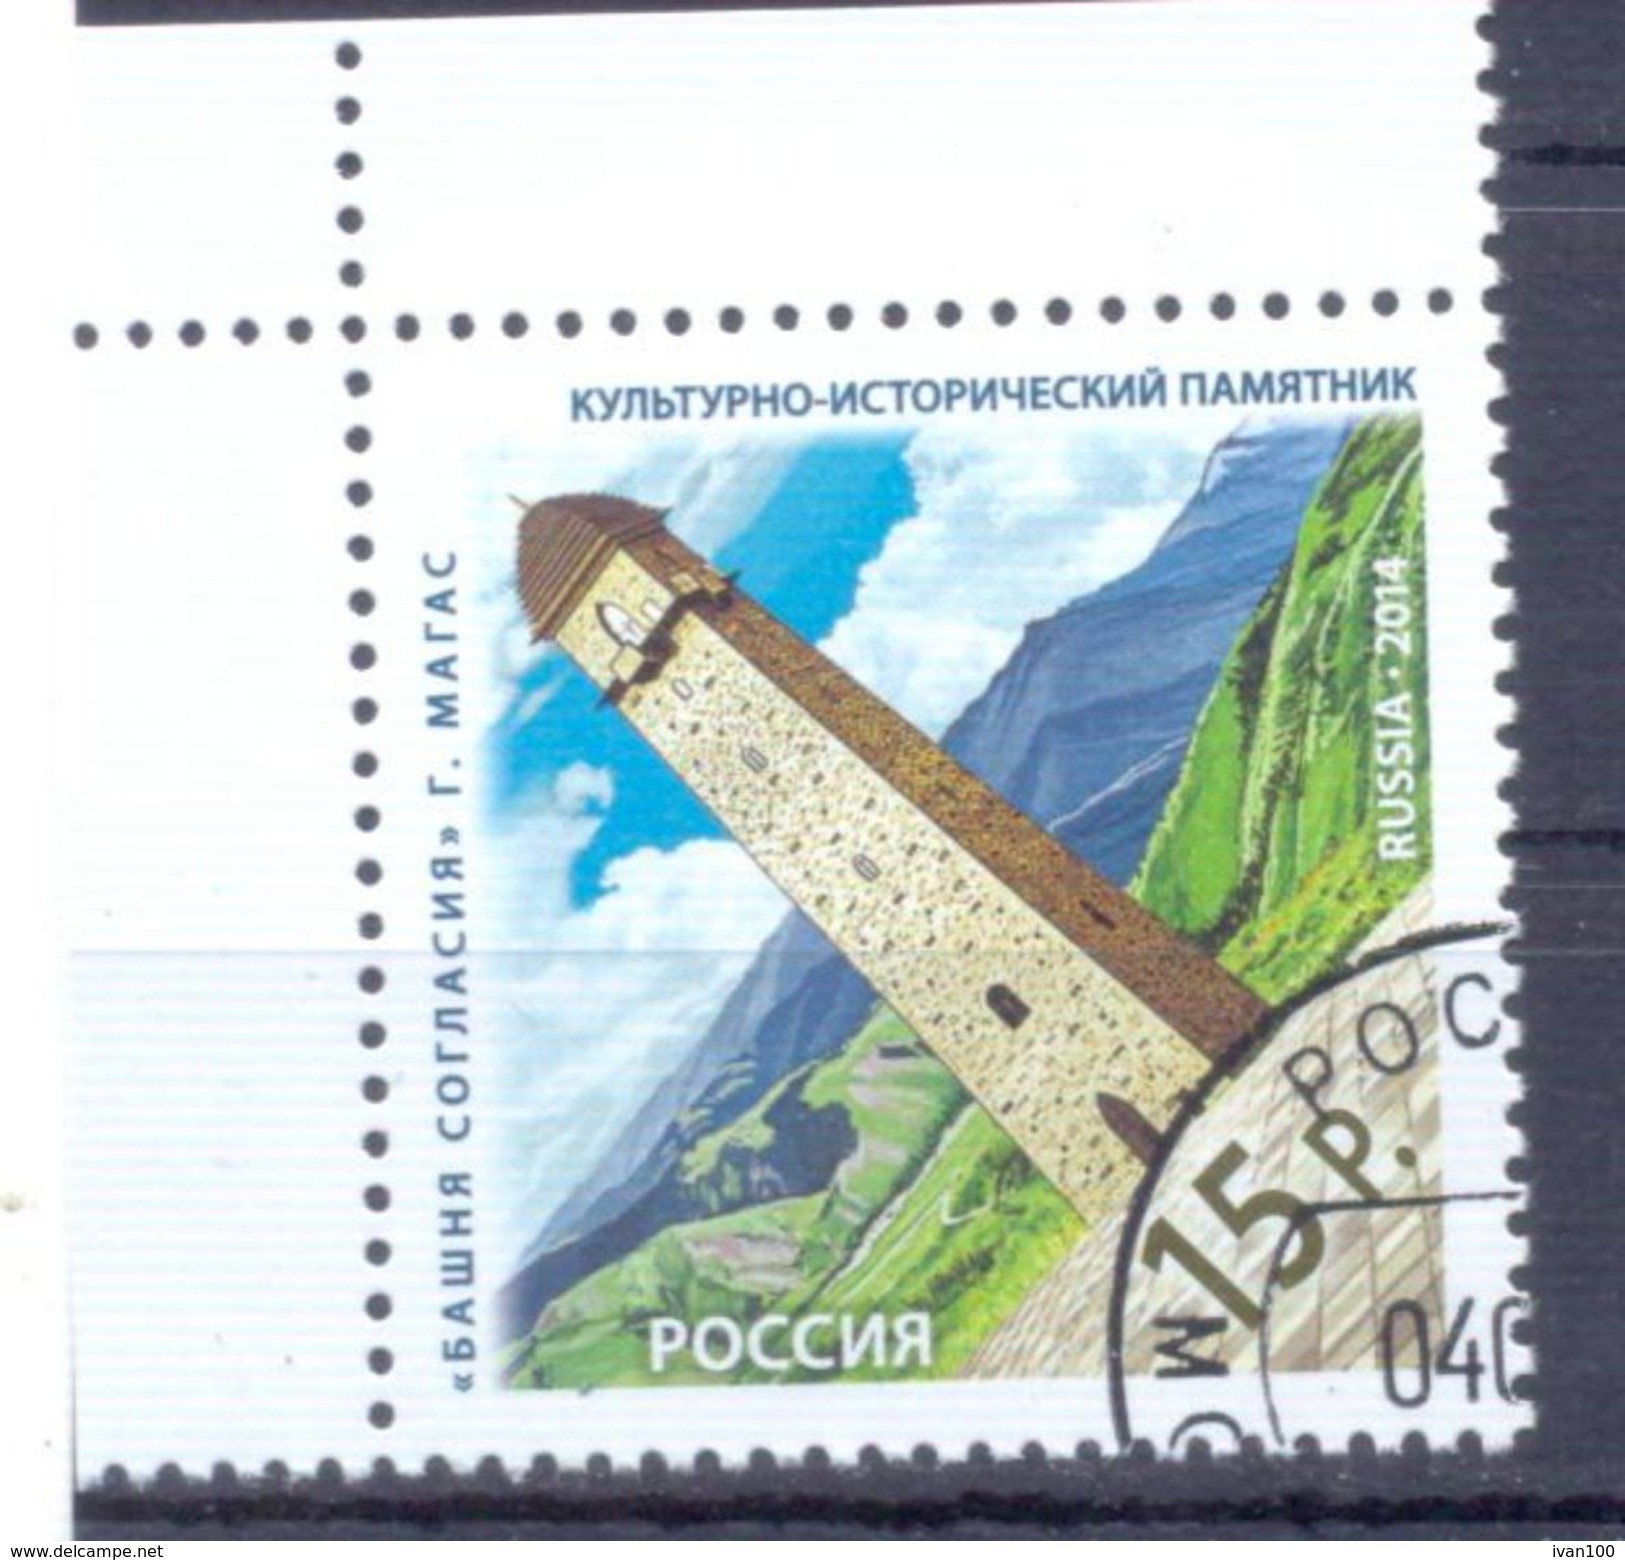 2014. Russia, The Consent Tower, Ingushetia, 1v, Used/CTO - Gebraucht